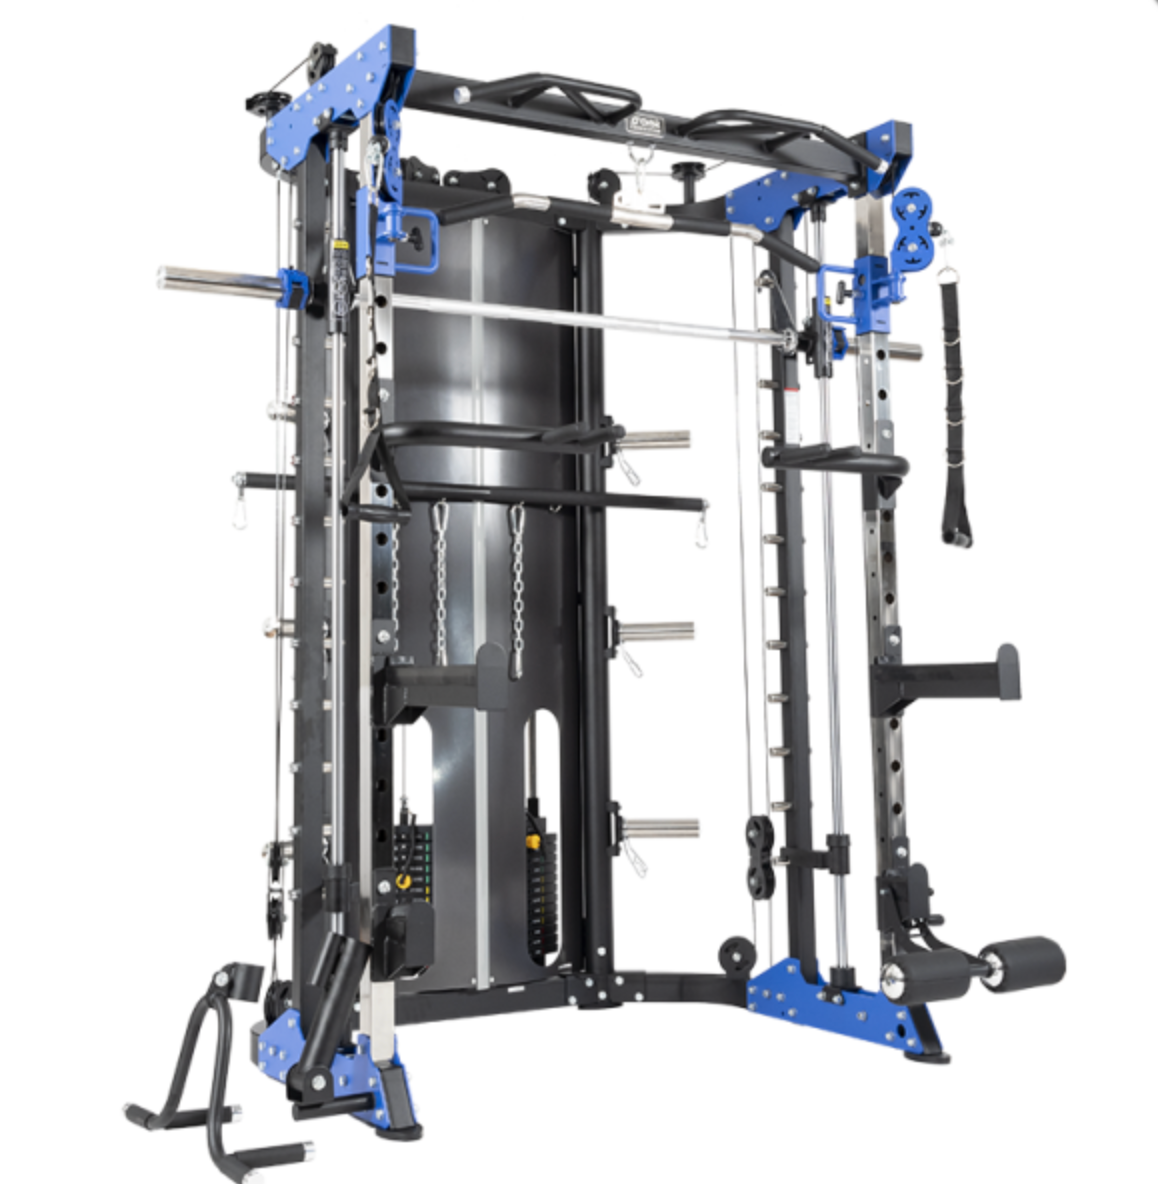 UltraMAX x305 Smith Machine / Half Rack - All In One | Arrives May - Fitness Hero Brand new